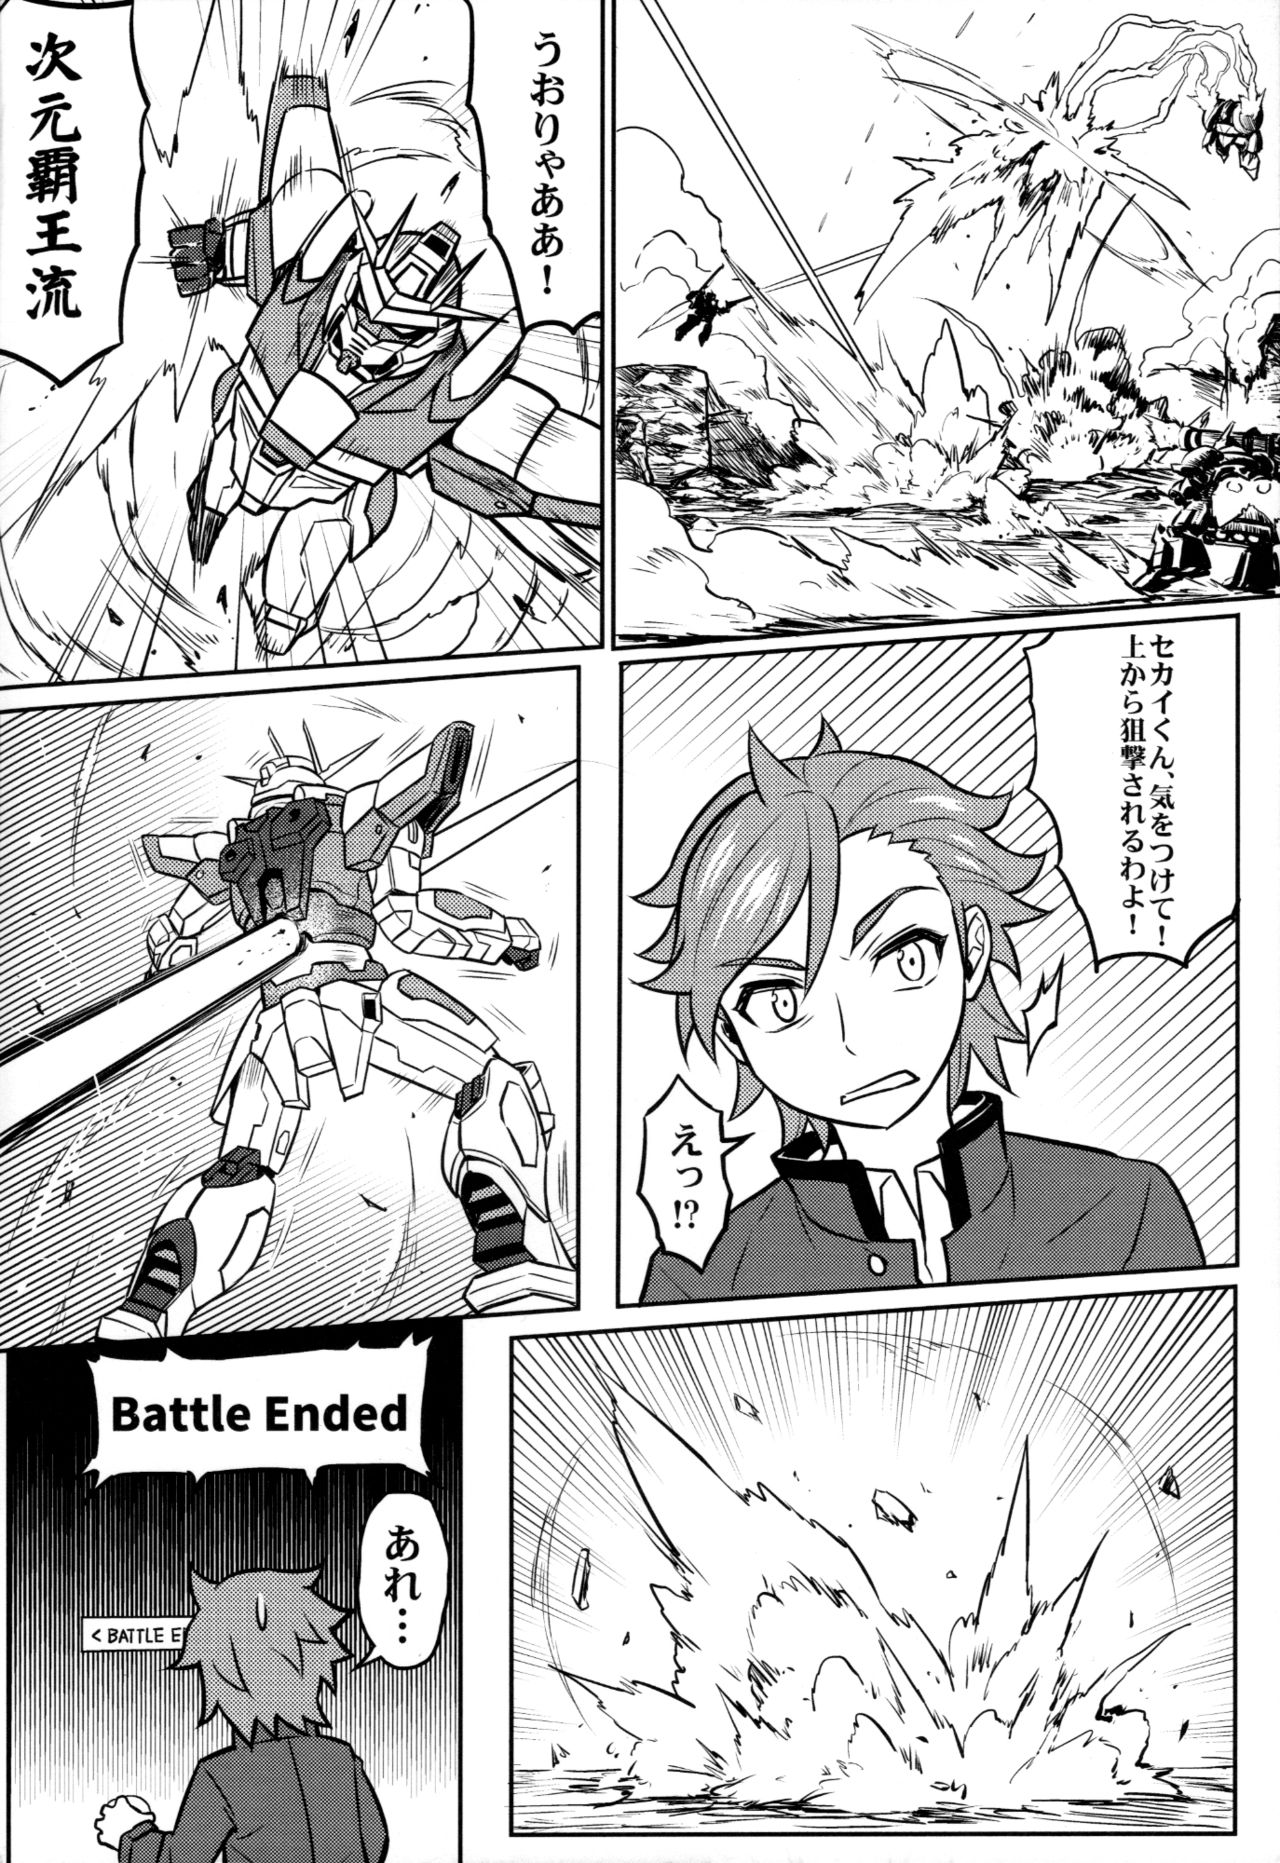 (C87) [Green Ketchup (Zhen Lu)] Nayamashii Fighters (Gundam Build Fighters Try) page 3 full